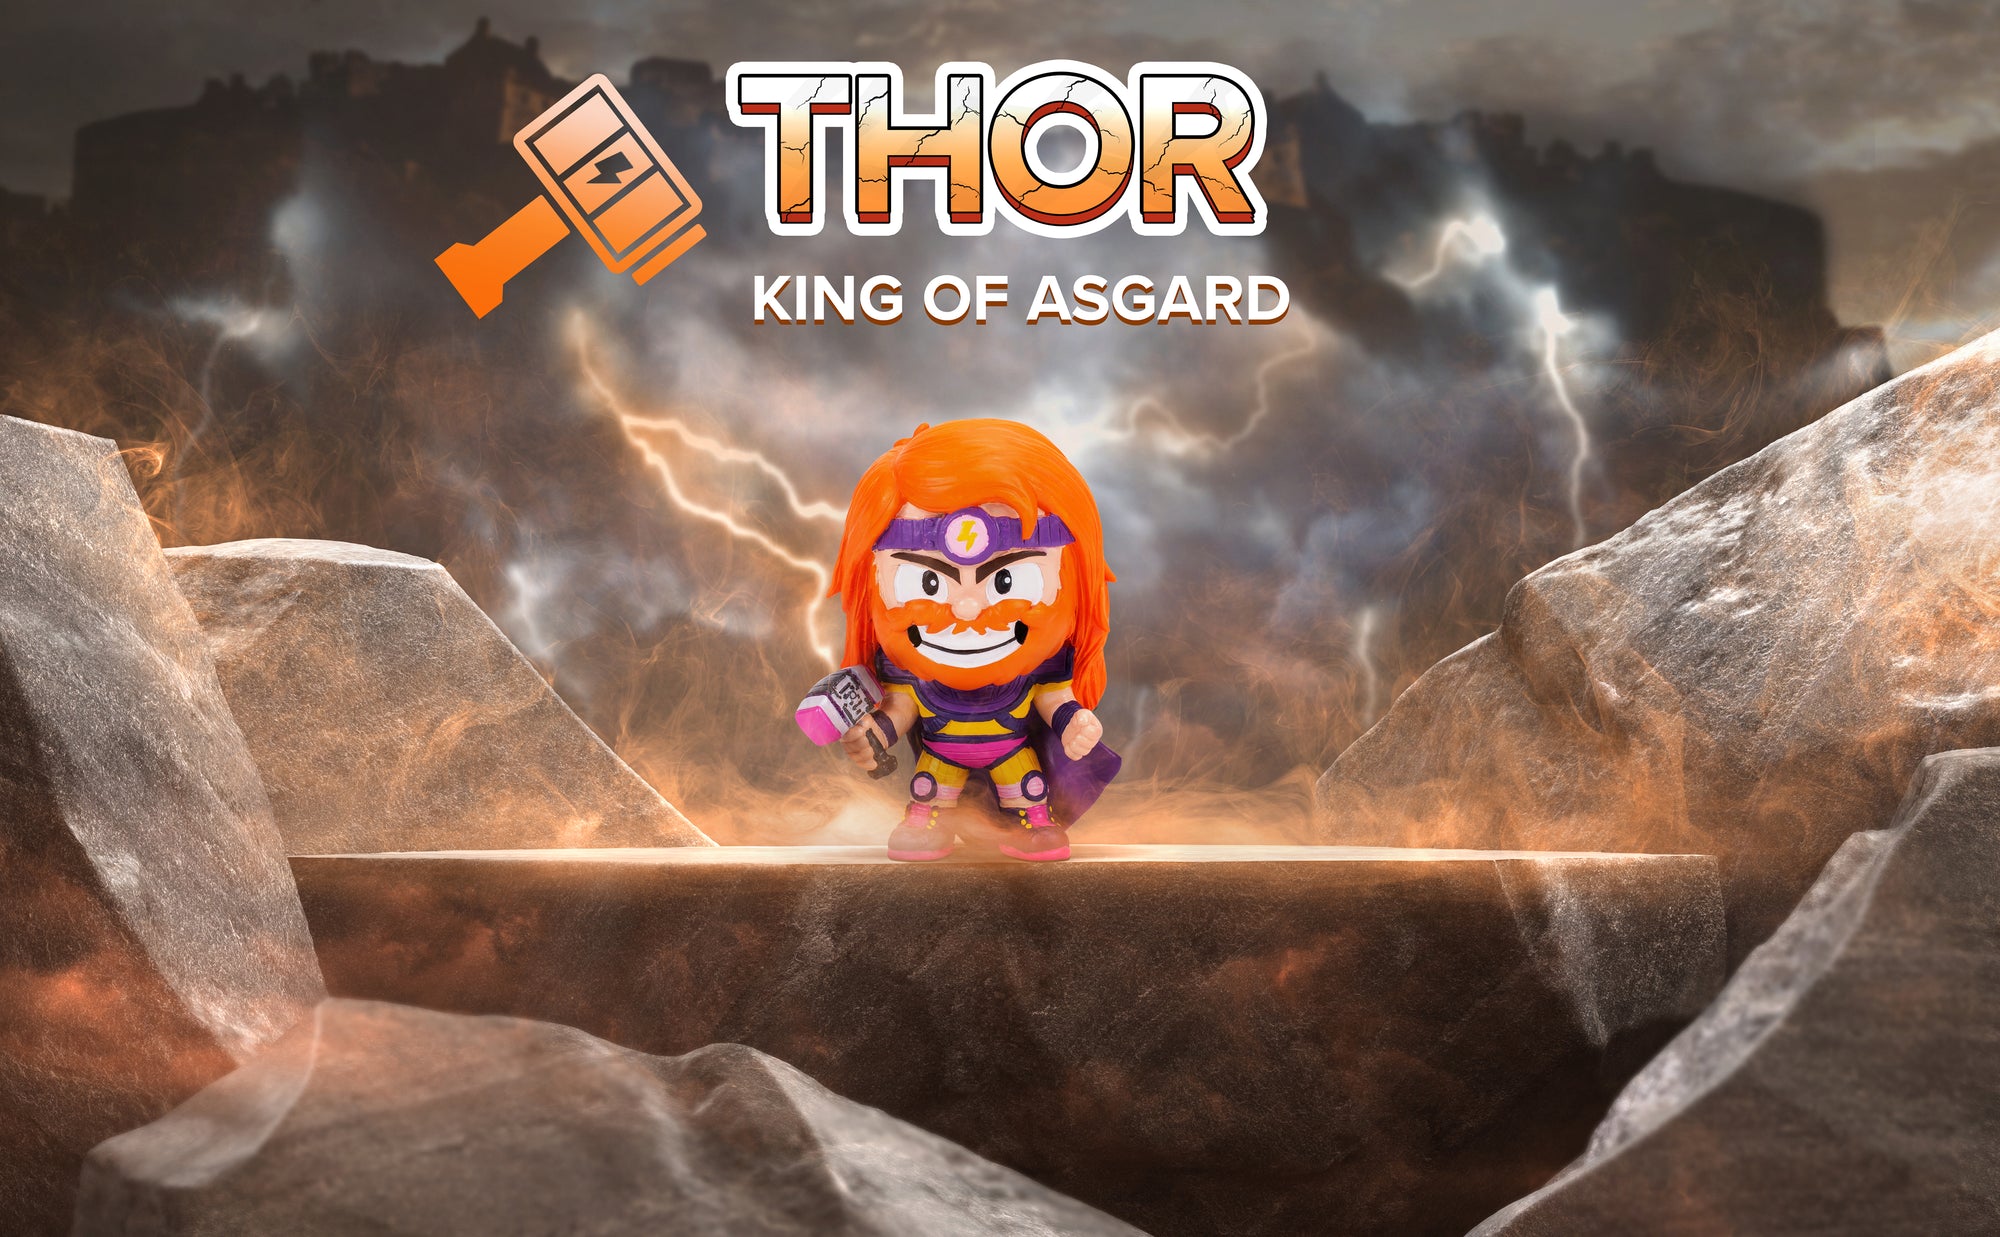 Thor Smashcraft collectible in realistic city with lightning, Asgard. Text "Thor, King of Asgard" and Thor's electric hammer logo